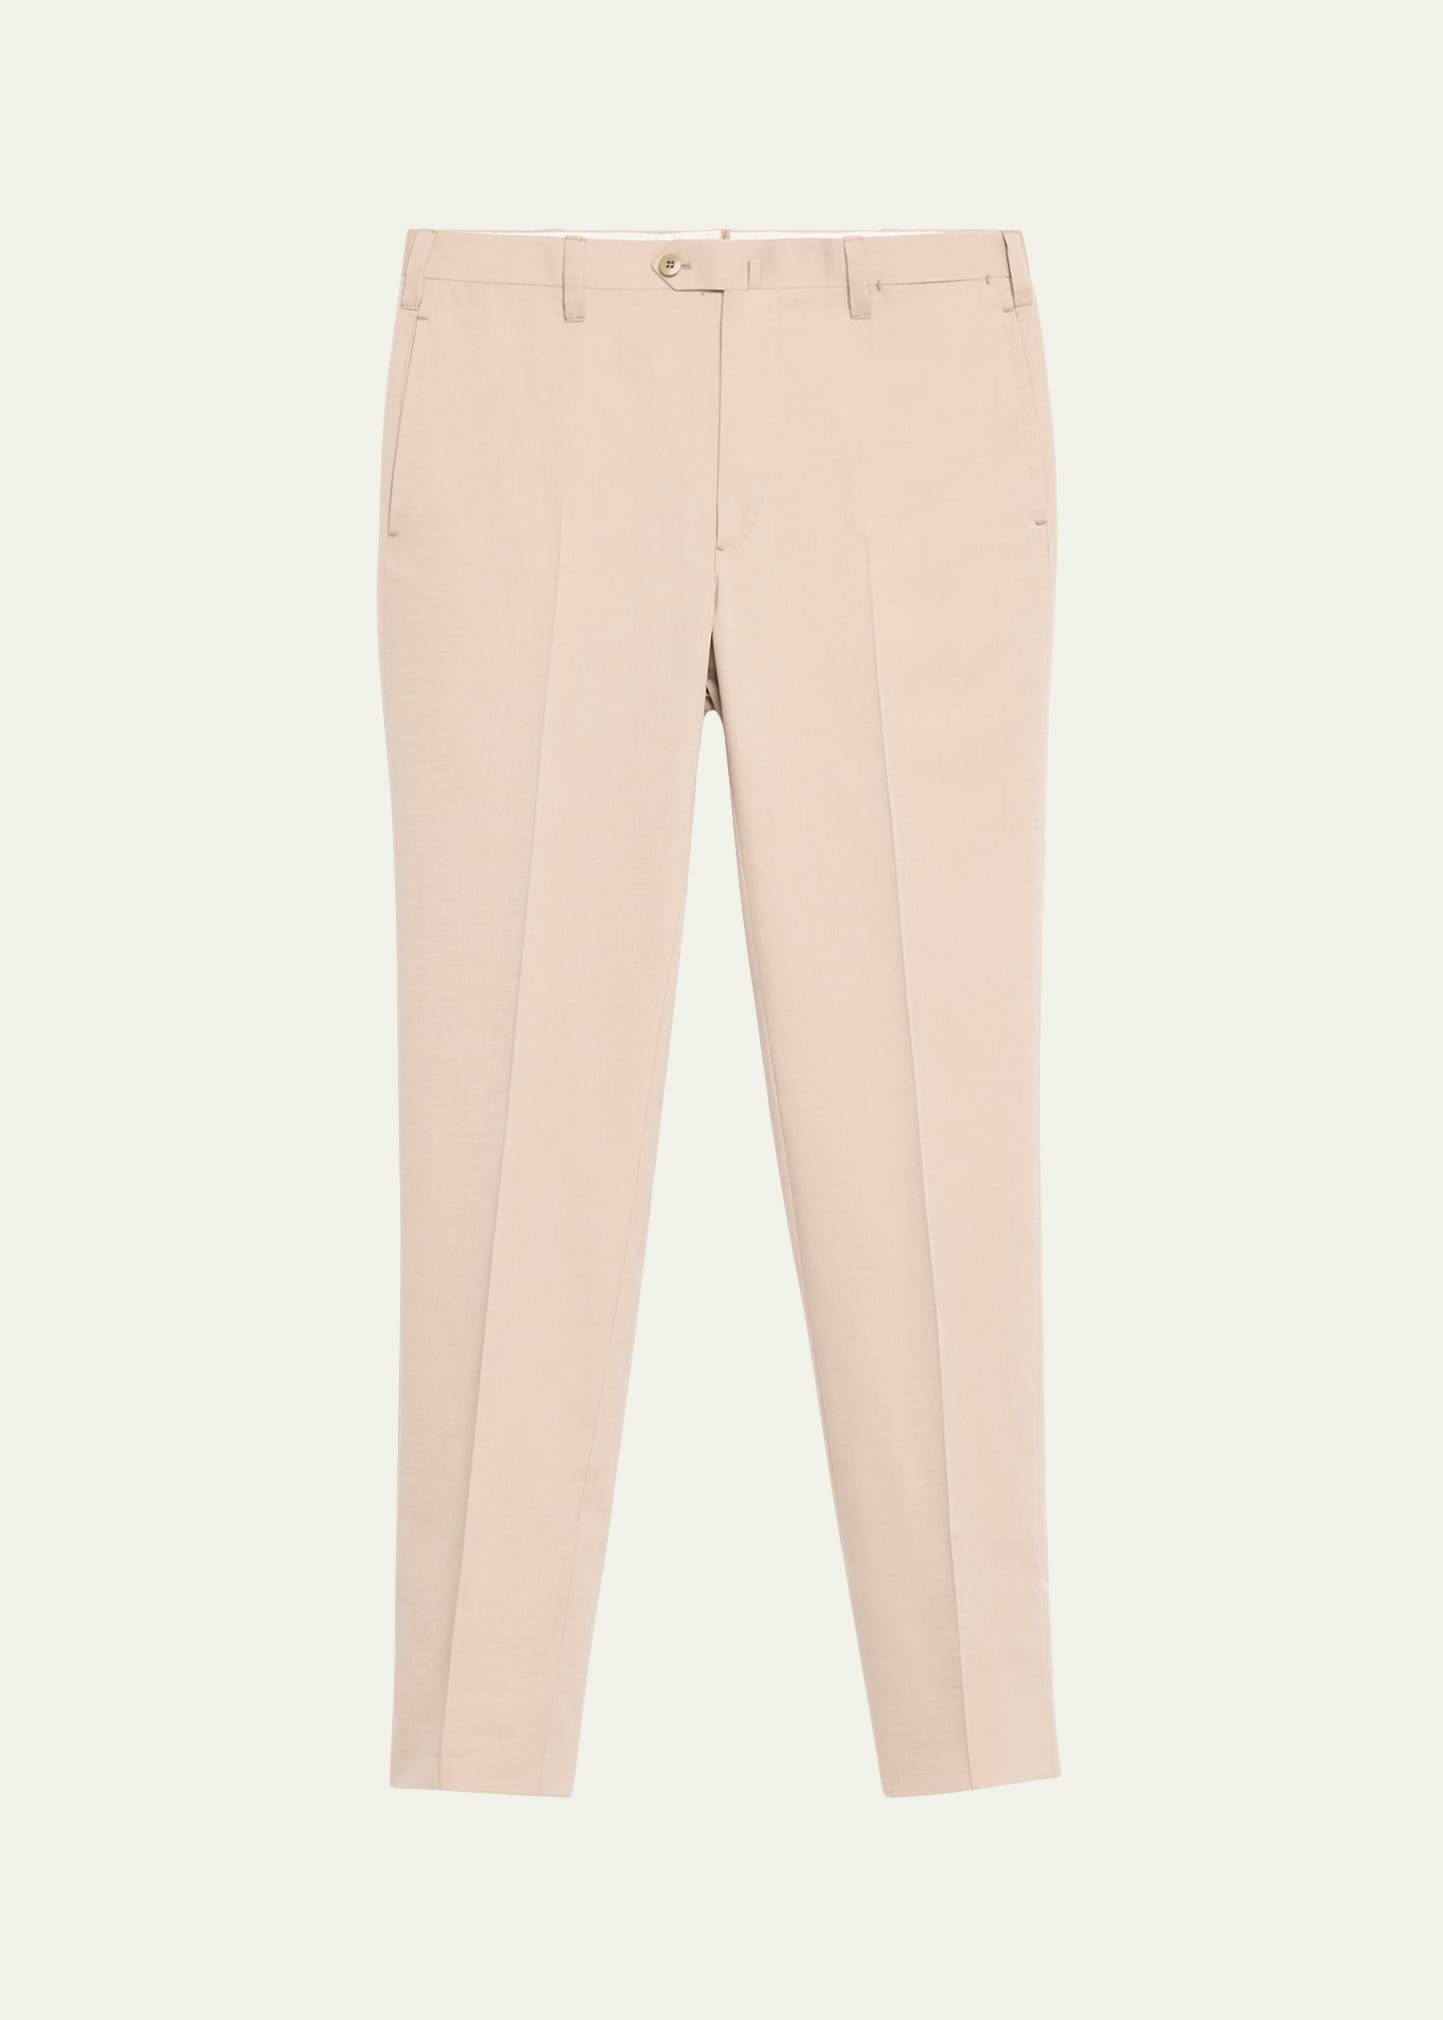 Shop Cesare Attolini Men's Flat-front Twill Trousers In N21-tan